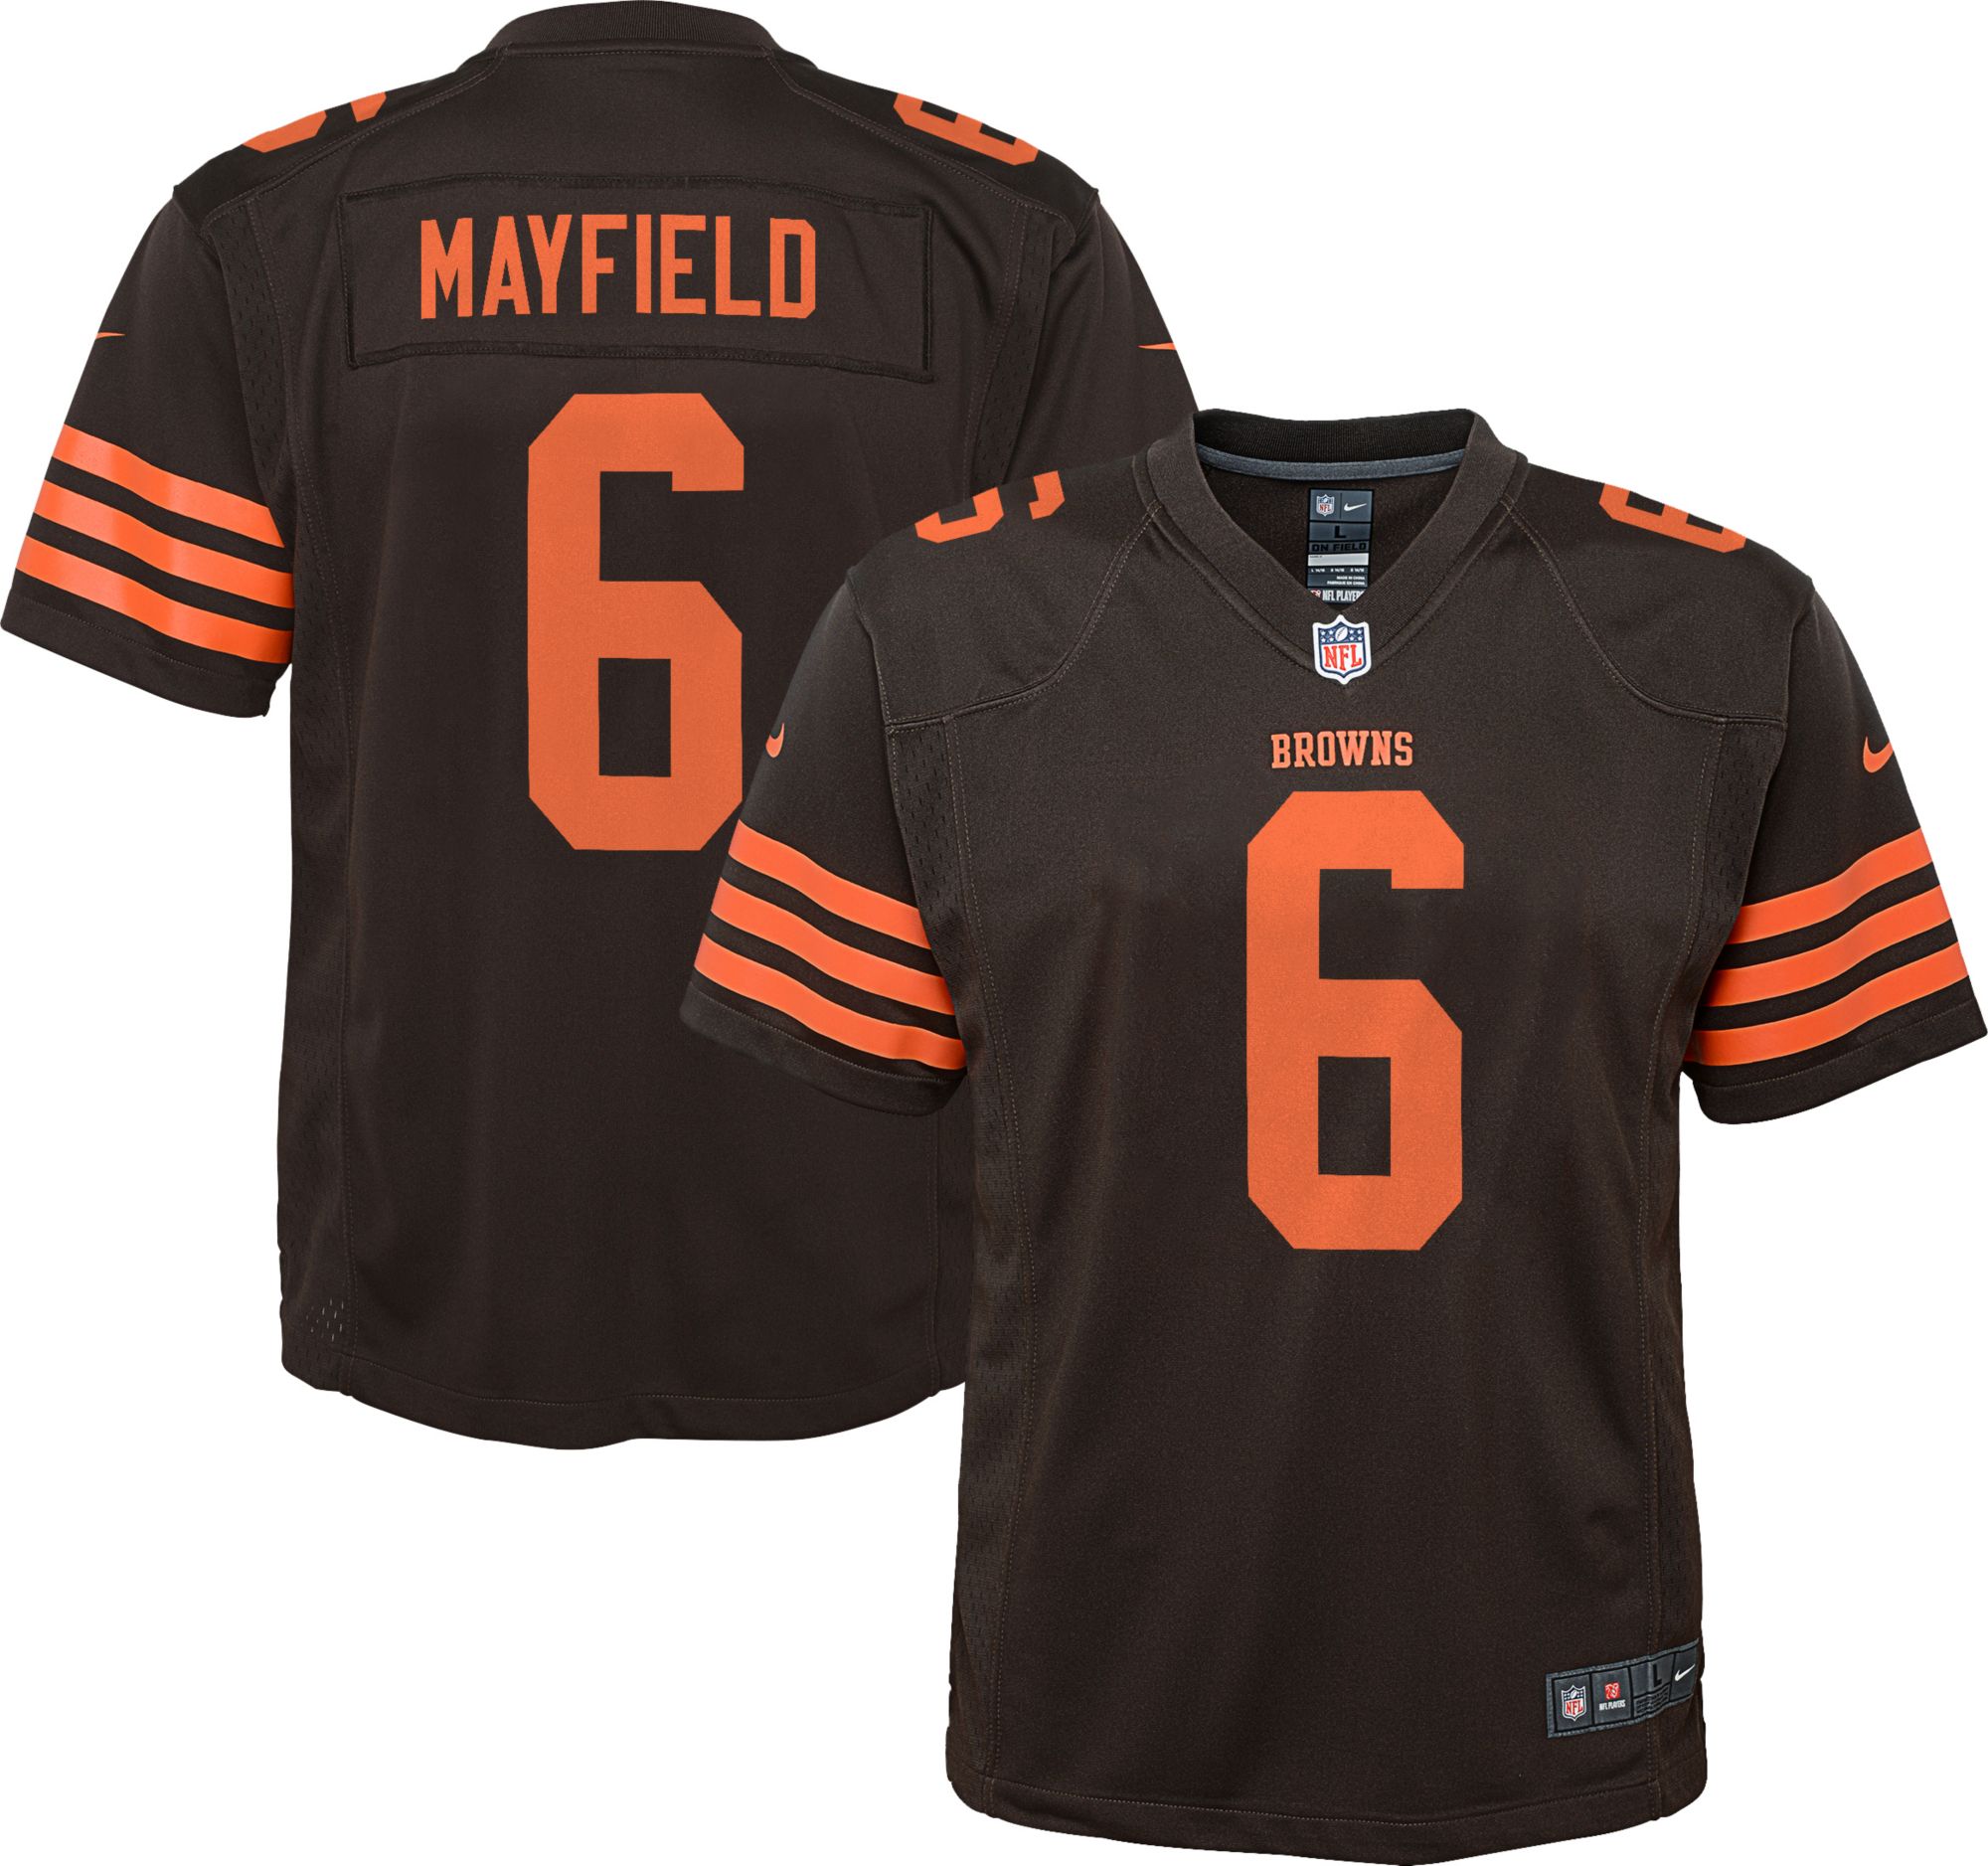 mayfield jersey color rush